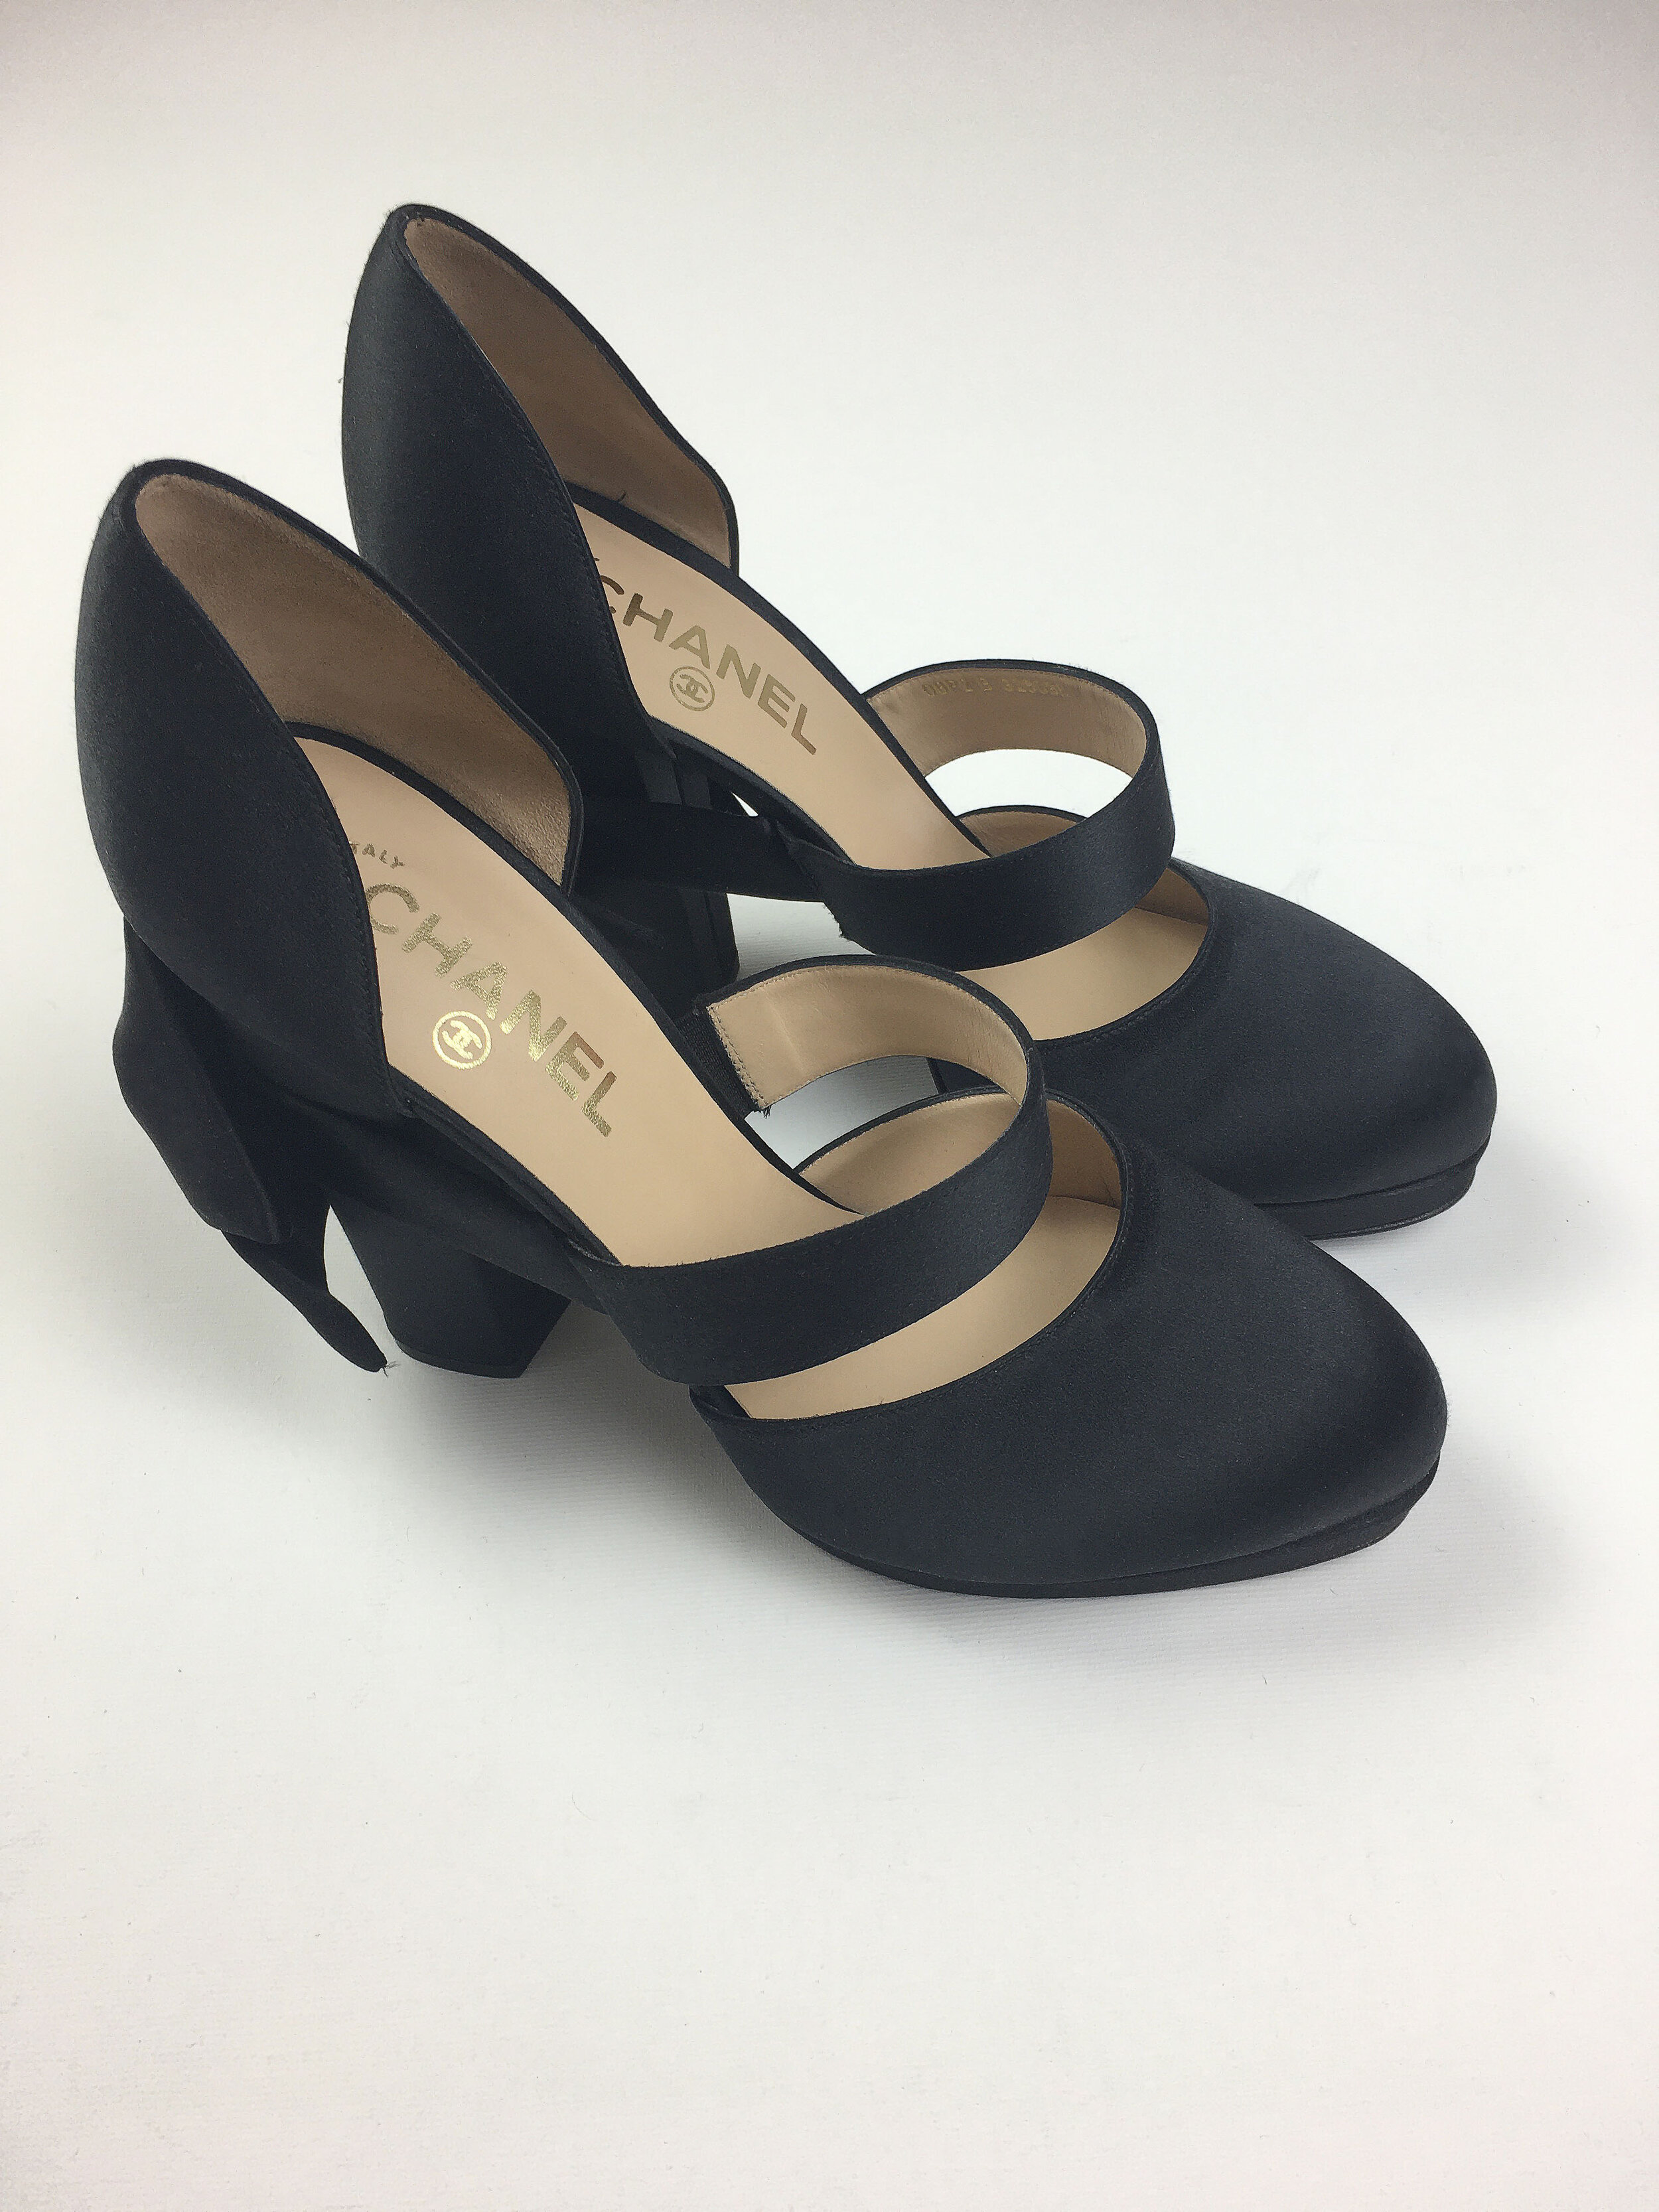 Second-hand black satin high heels shoes with bow CHANEL — Reset your closet